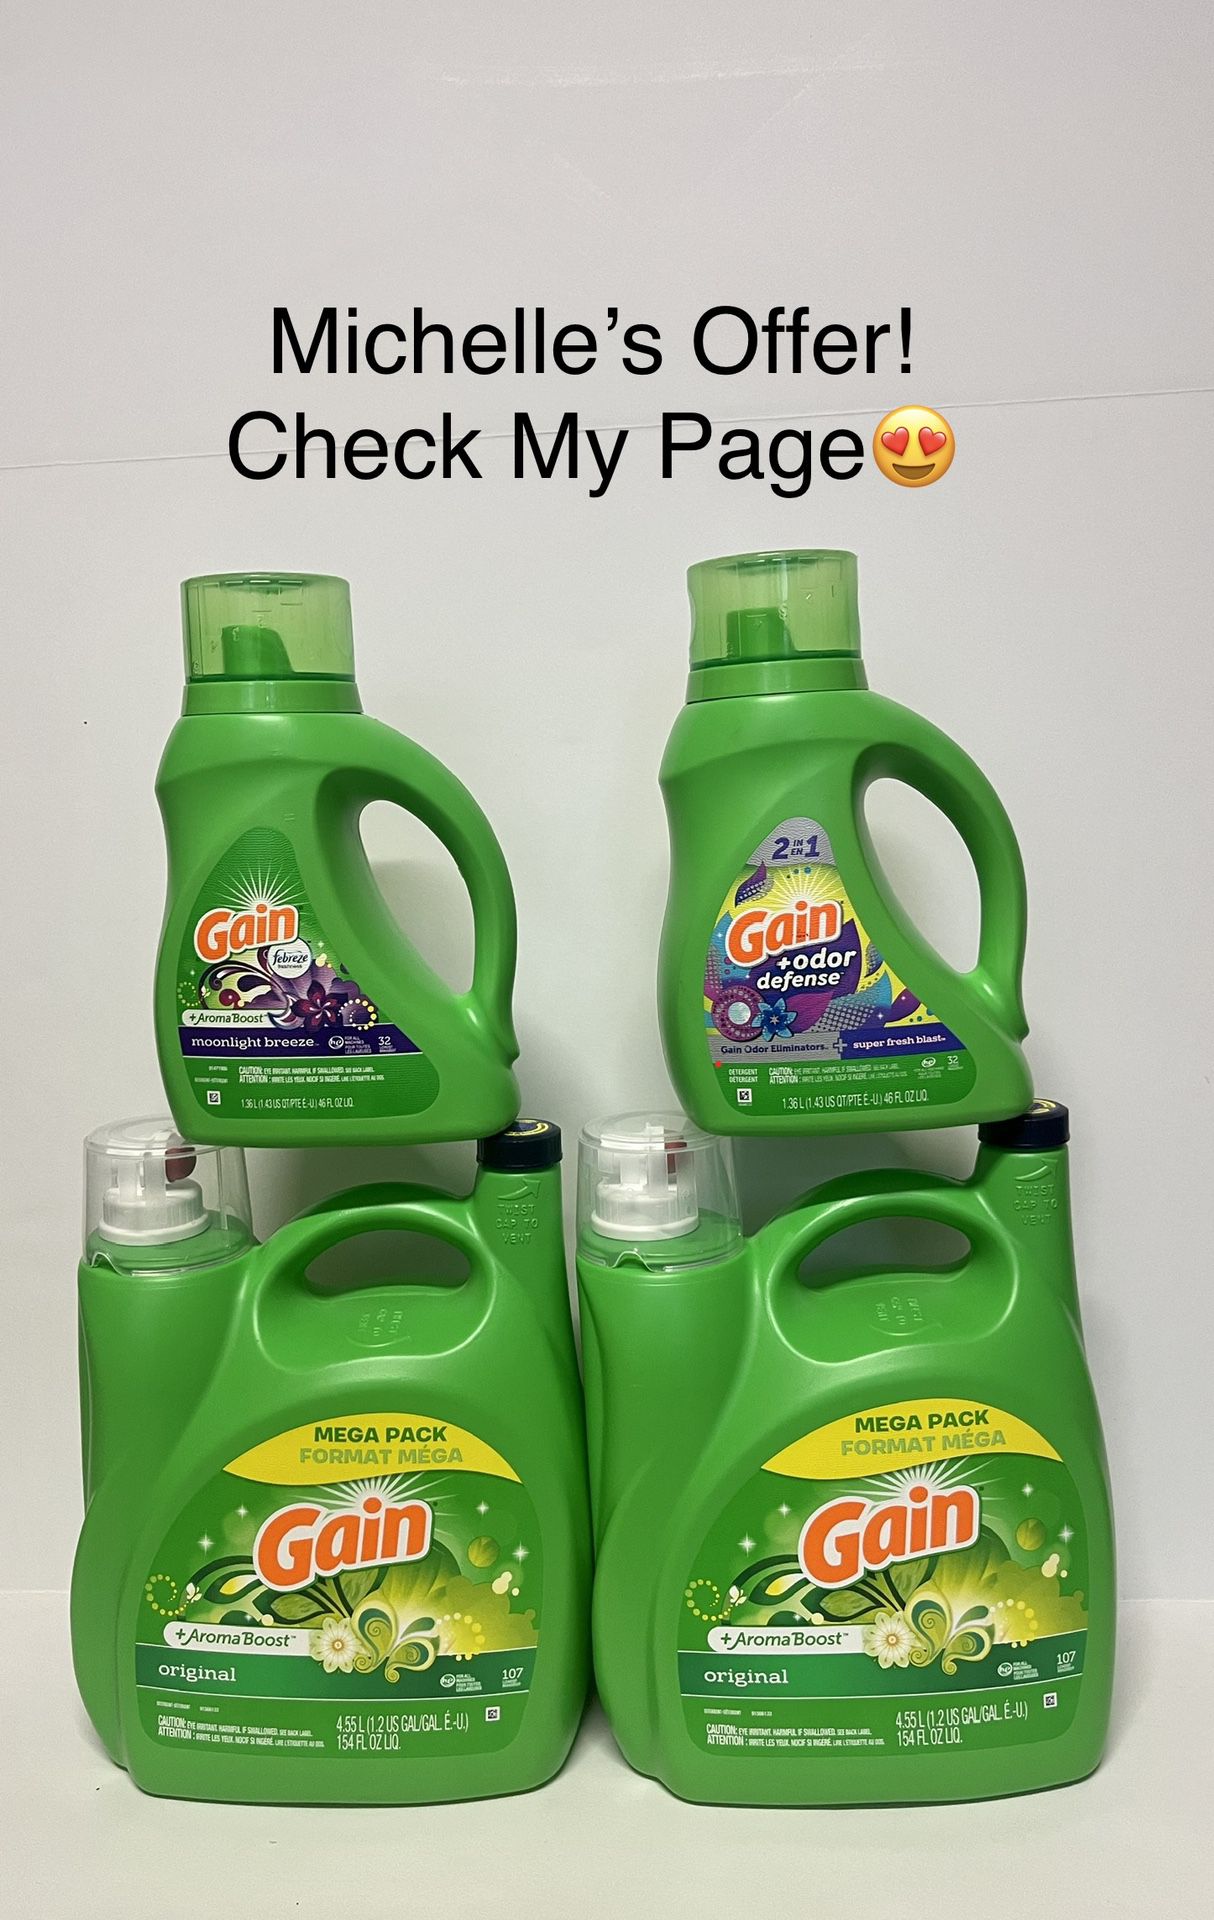 Gain Original With Aromaboost /Gain 2in1 Laundry Detergent Set